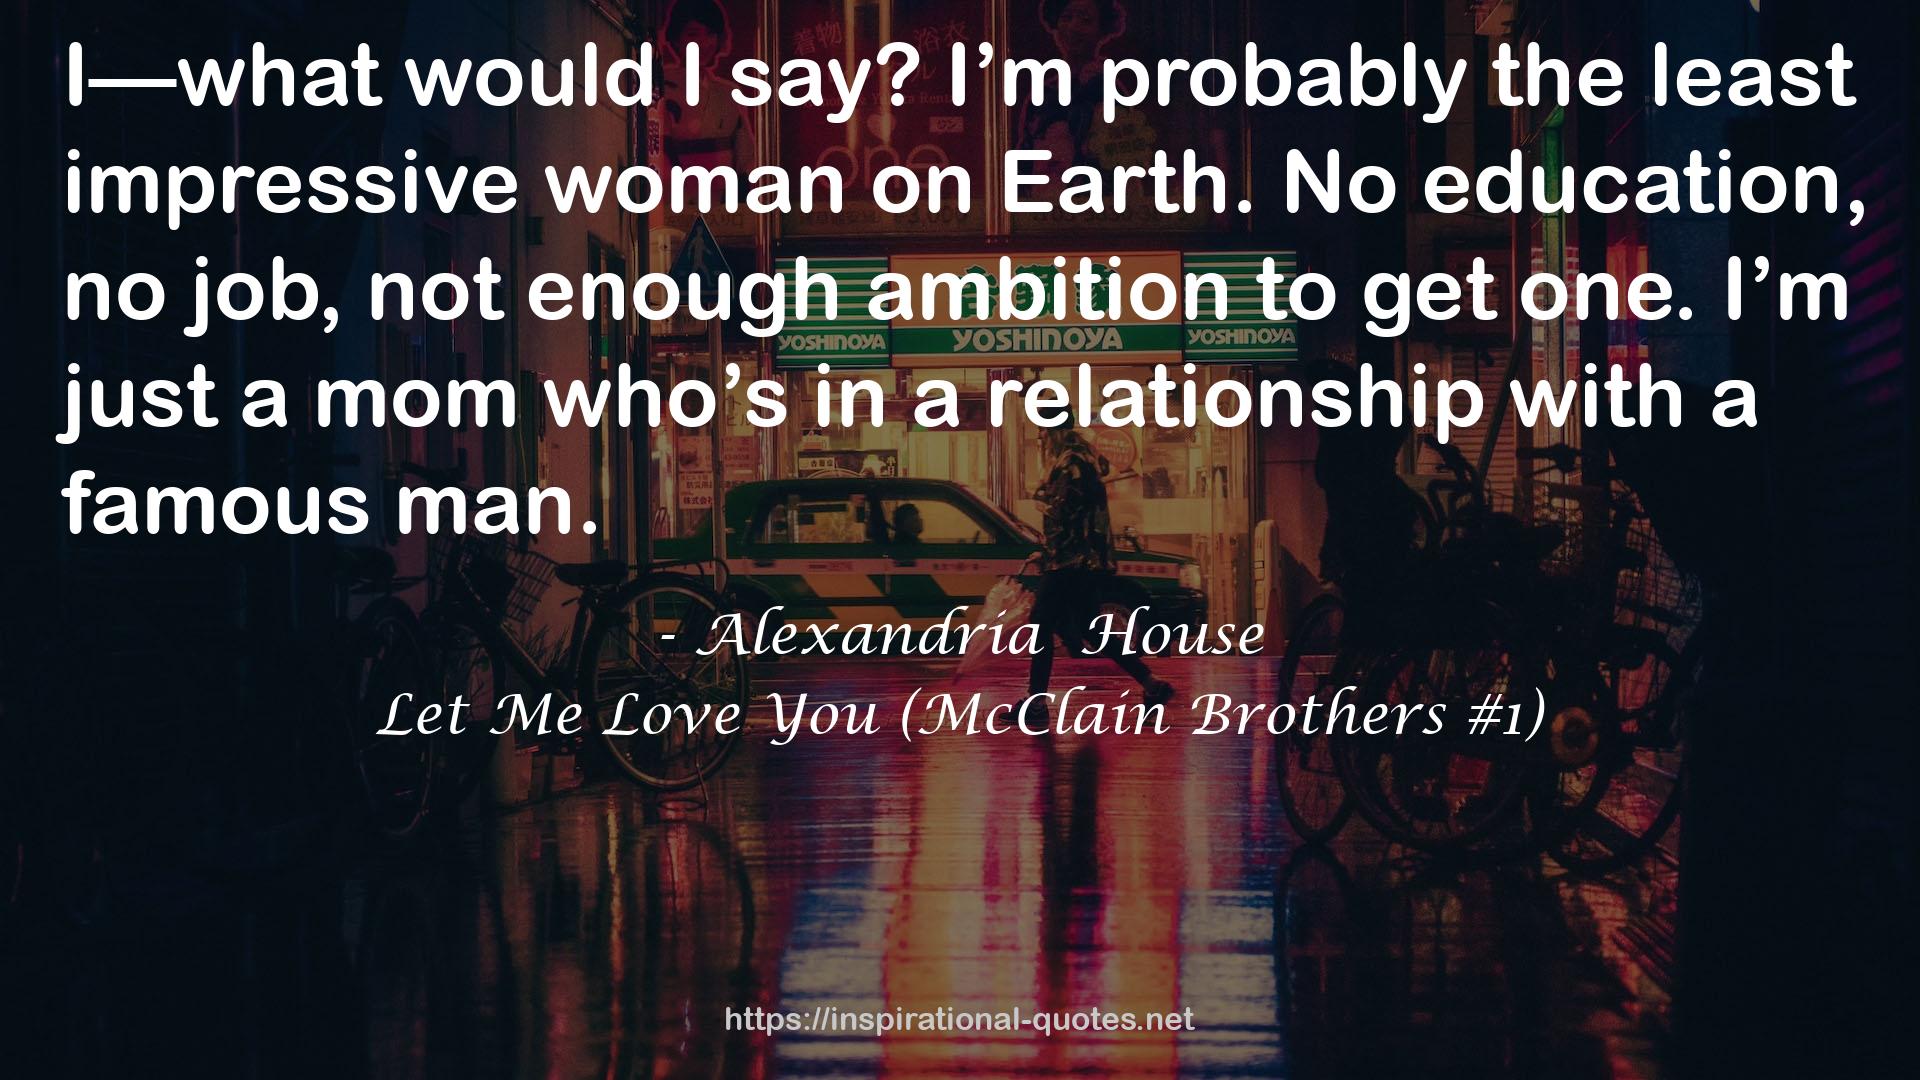 Let Me Love You (McClain Brothers #1) QUOTES